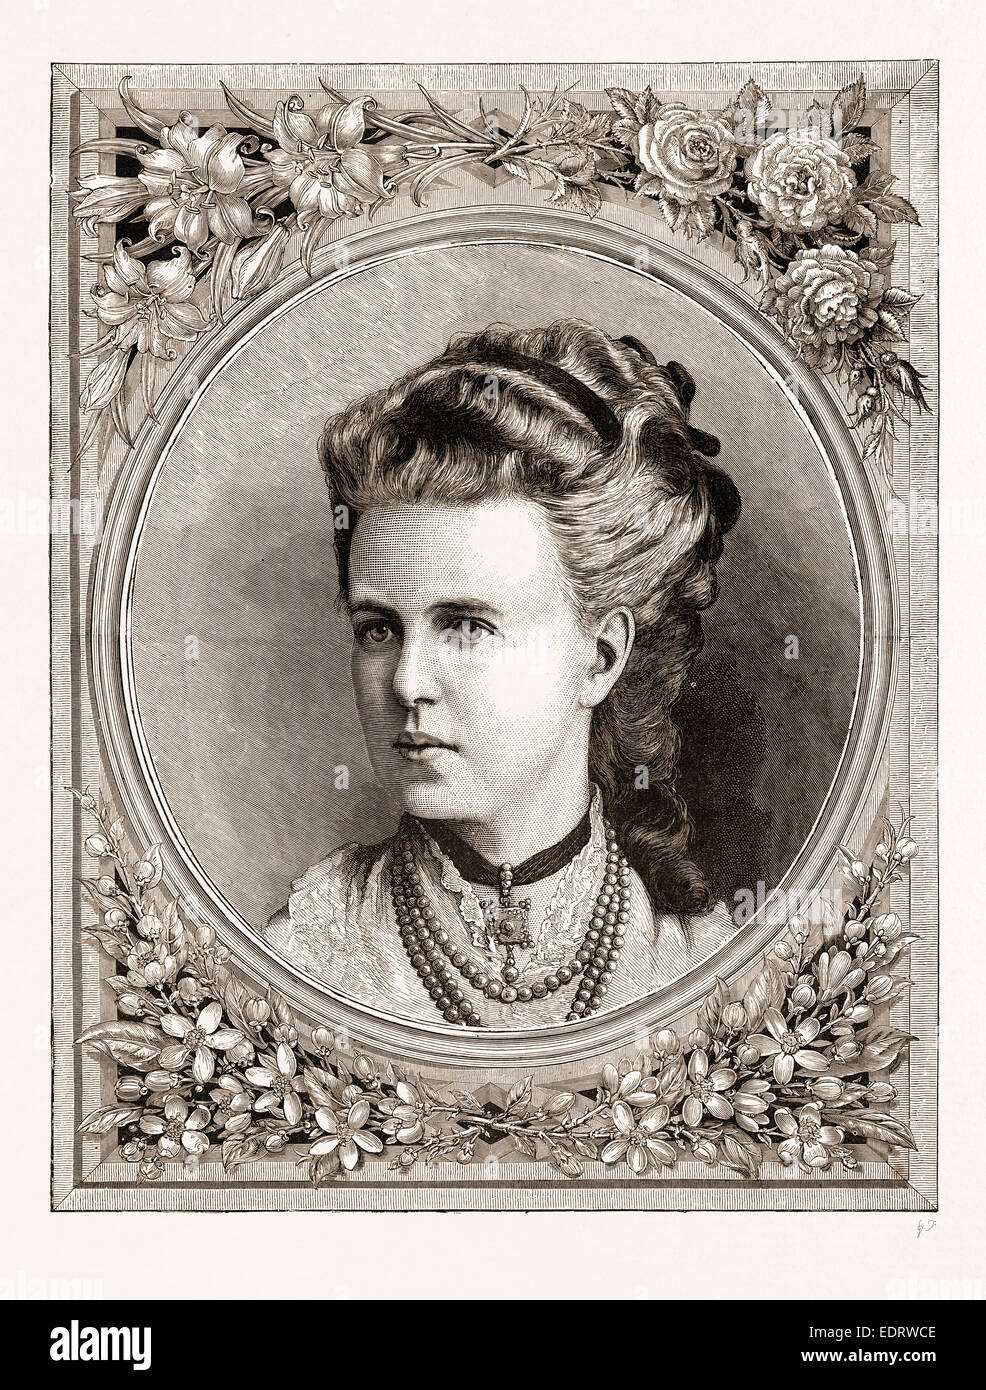 HER IMPERIAL HIGHNESS THE GRAND DUCHESS MARIA ALEXANDROWNA OF RUSSIA, ENGRAVING 1873 Stock Photo